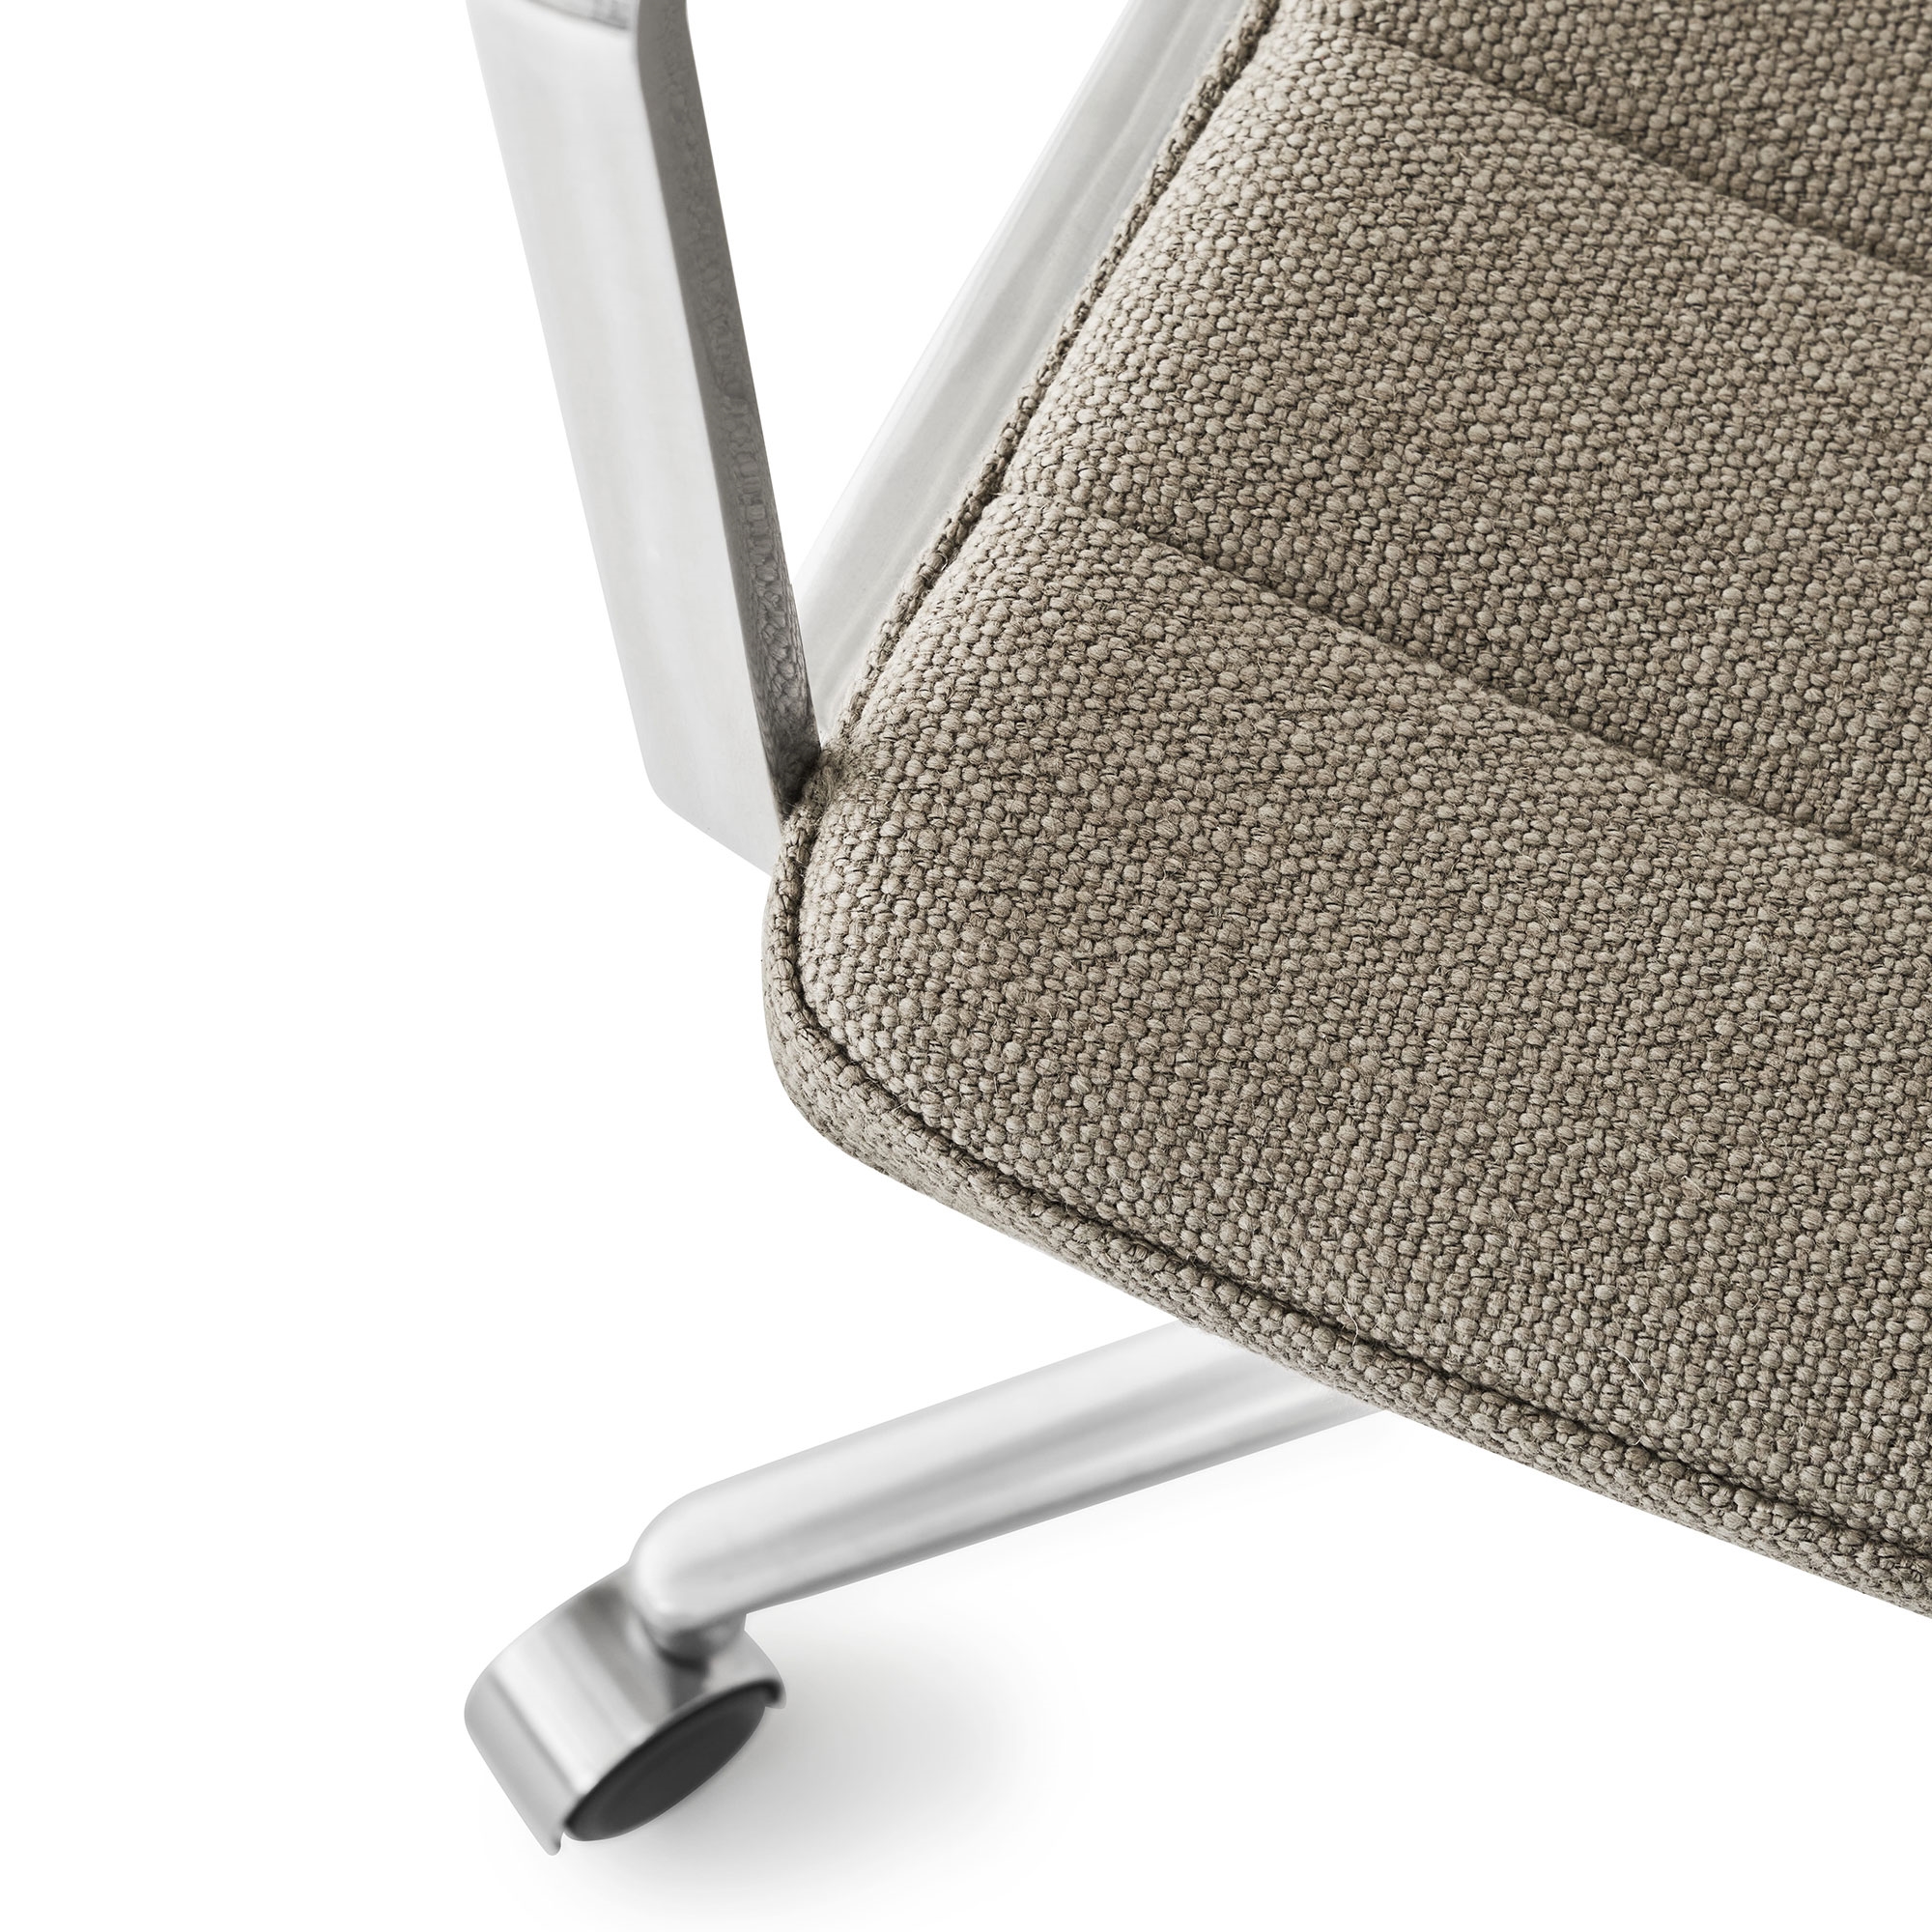 VIPP 452 // SWIVEL CHAIR - SAND TEXTILE, POLISHED FRAME, CASTERS